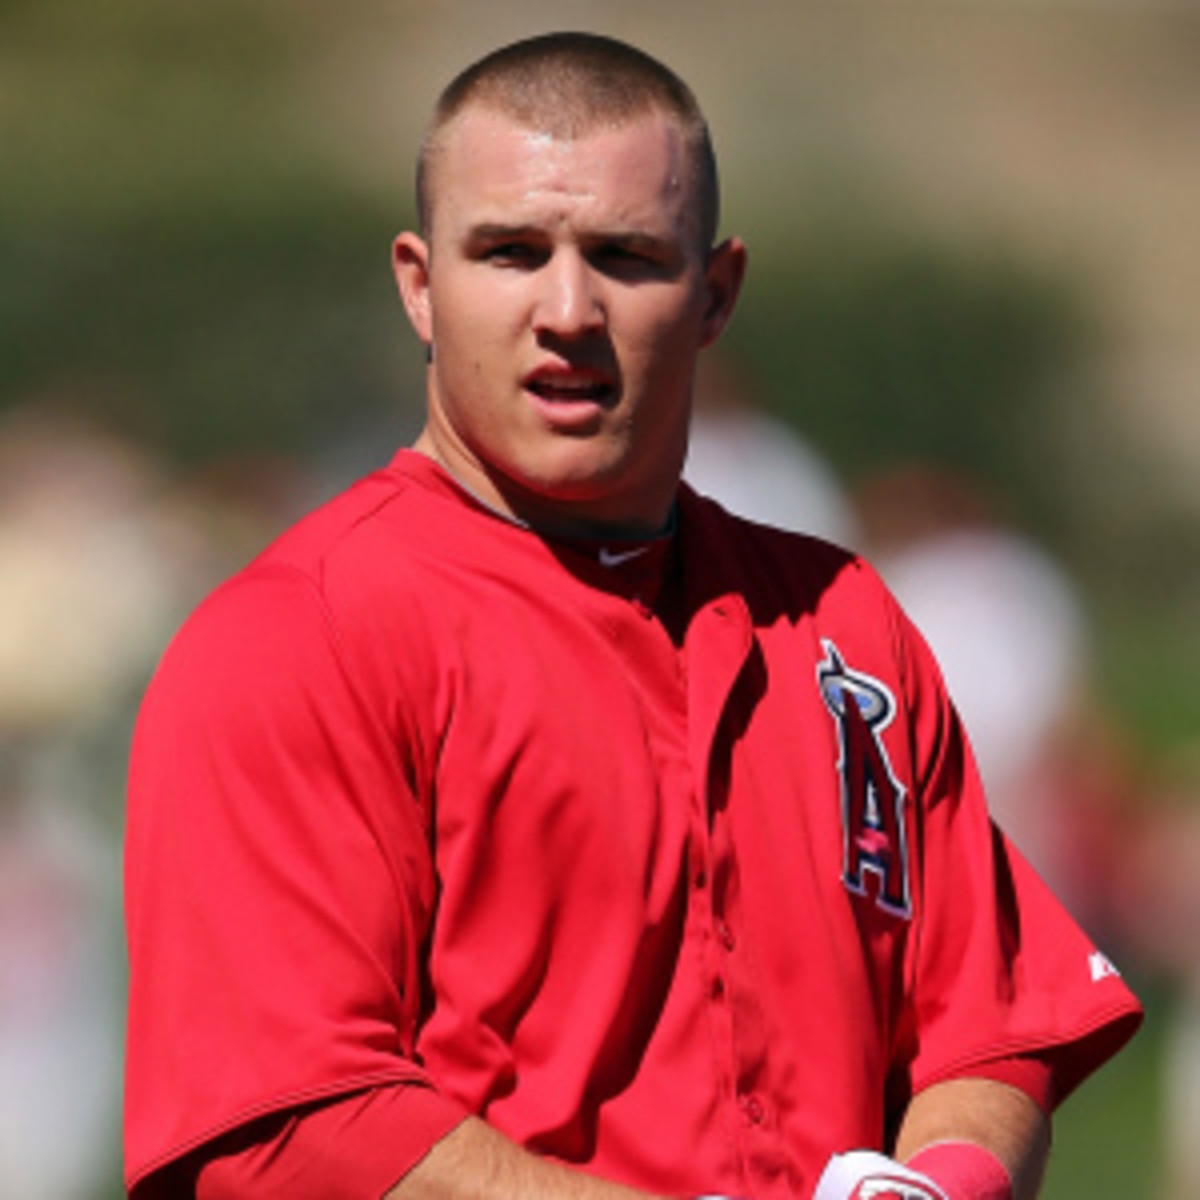 Mike Trout donated $20,000 to upgrade the athletic field at his high school. (Christian Petersen/Getty Images)